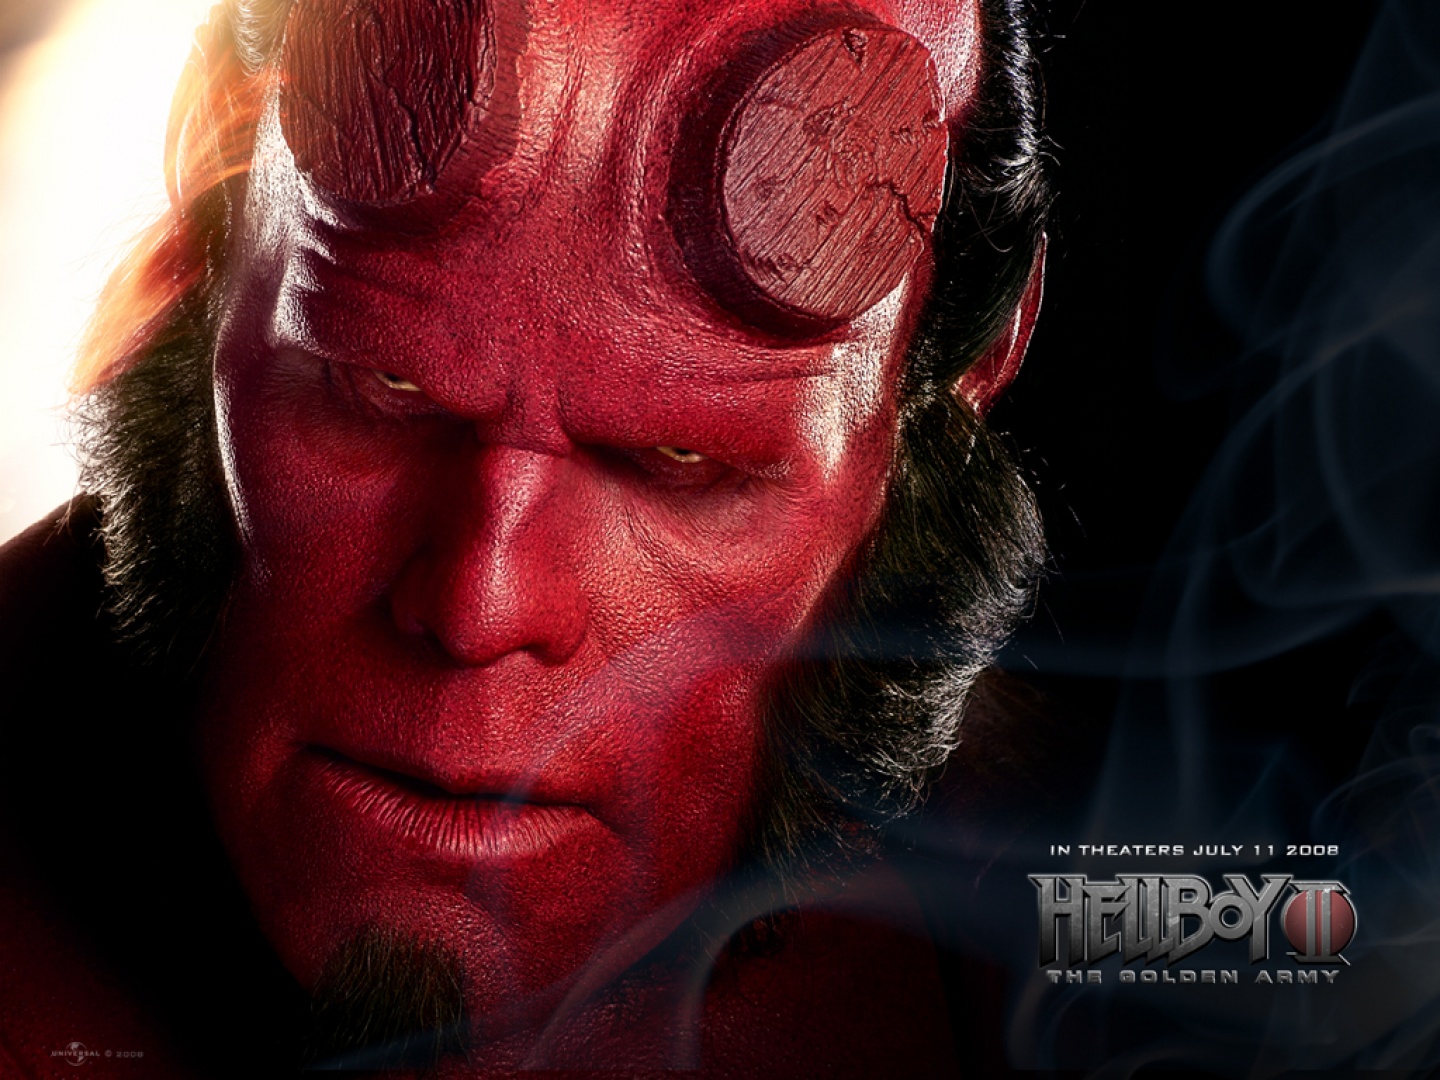 Hellboy Ii: The Golden Army Wallpapers